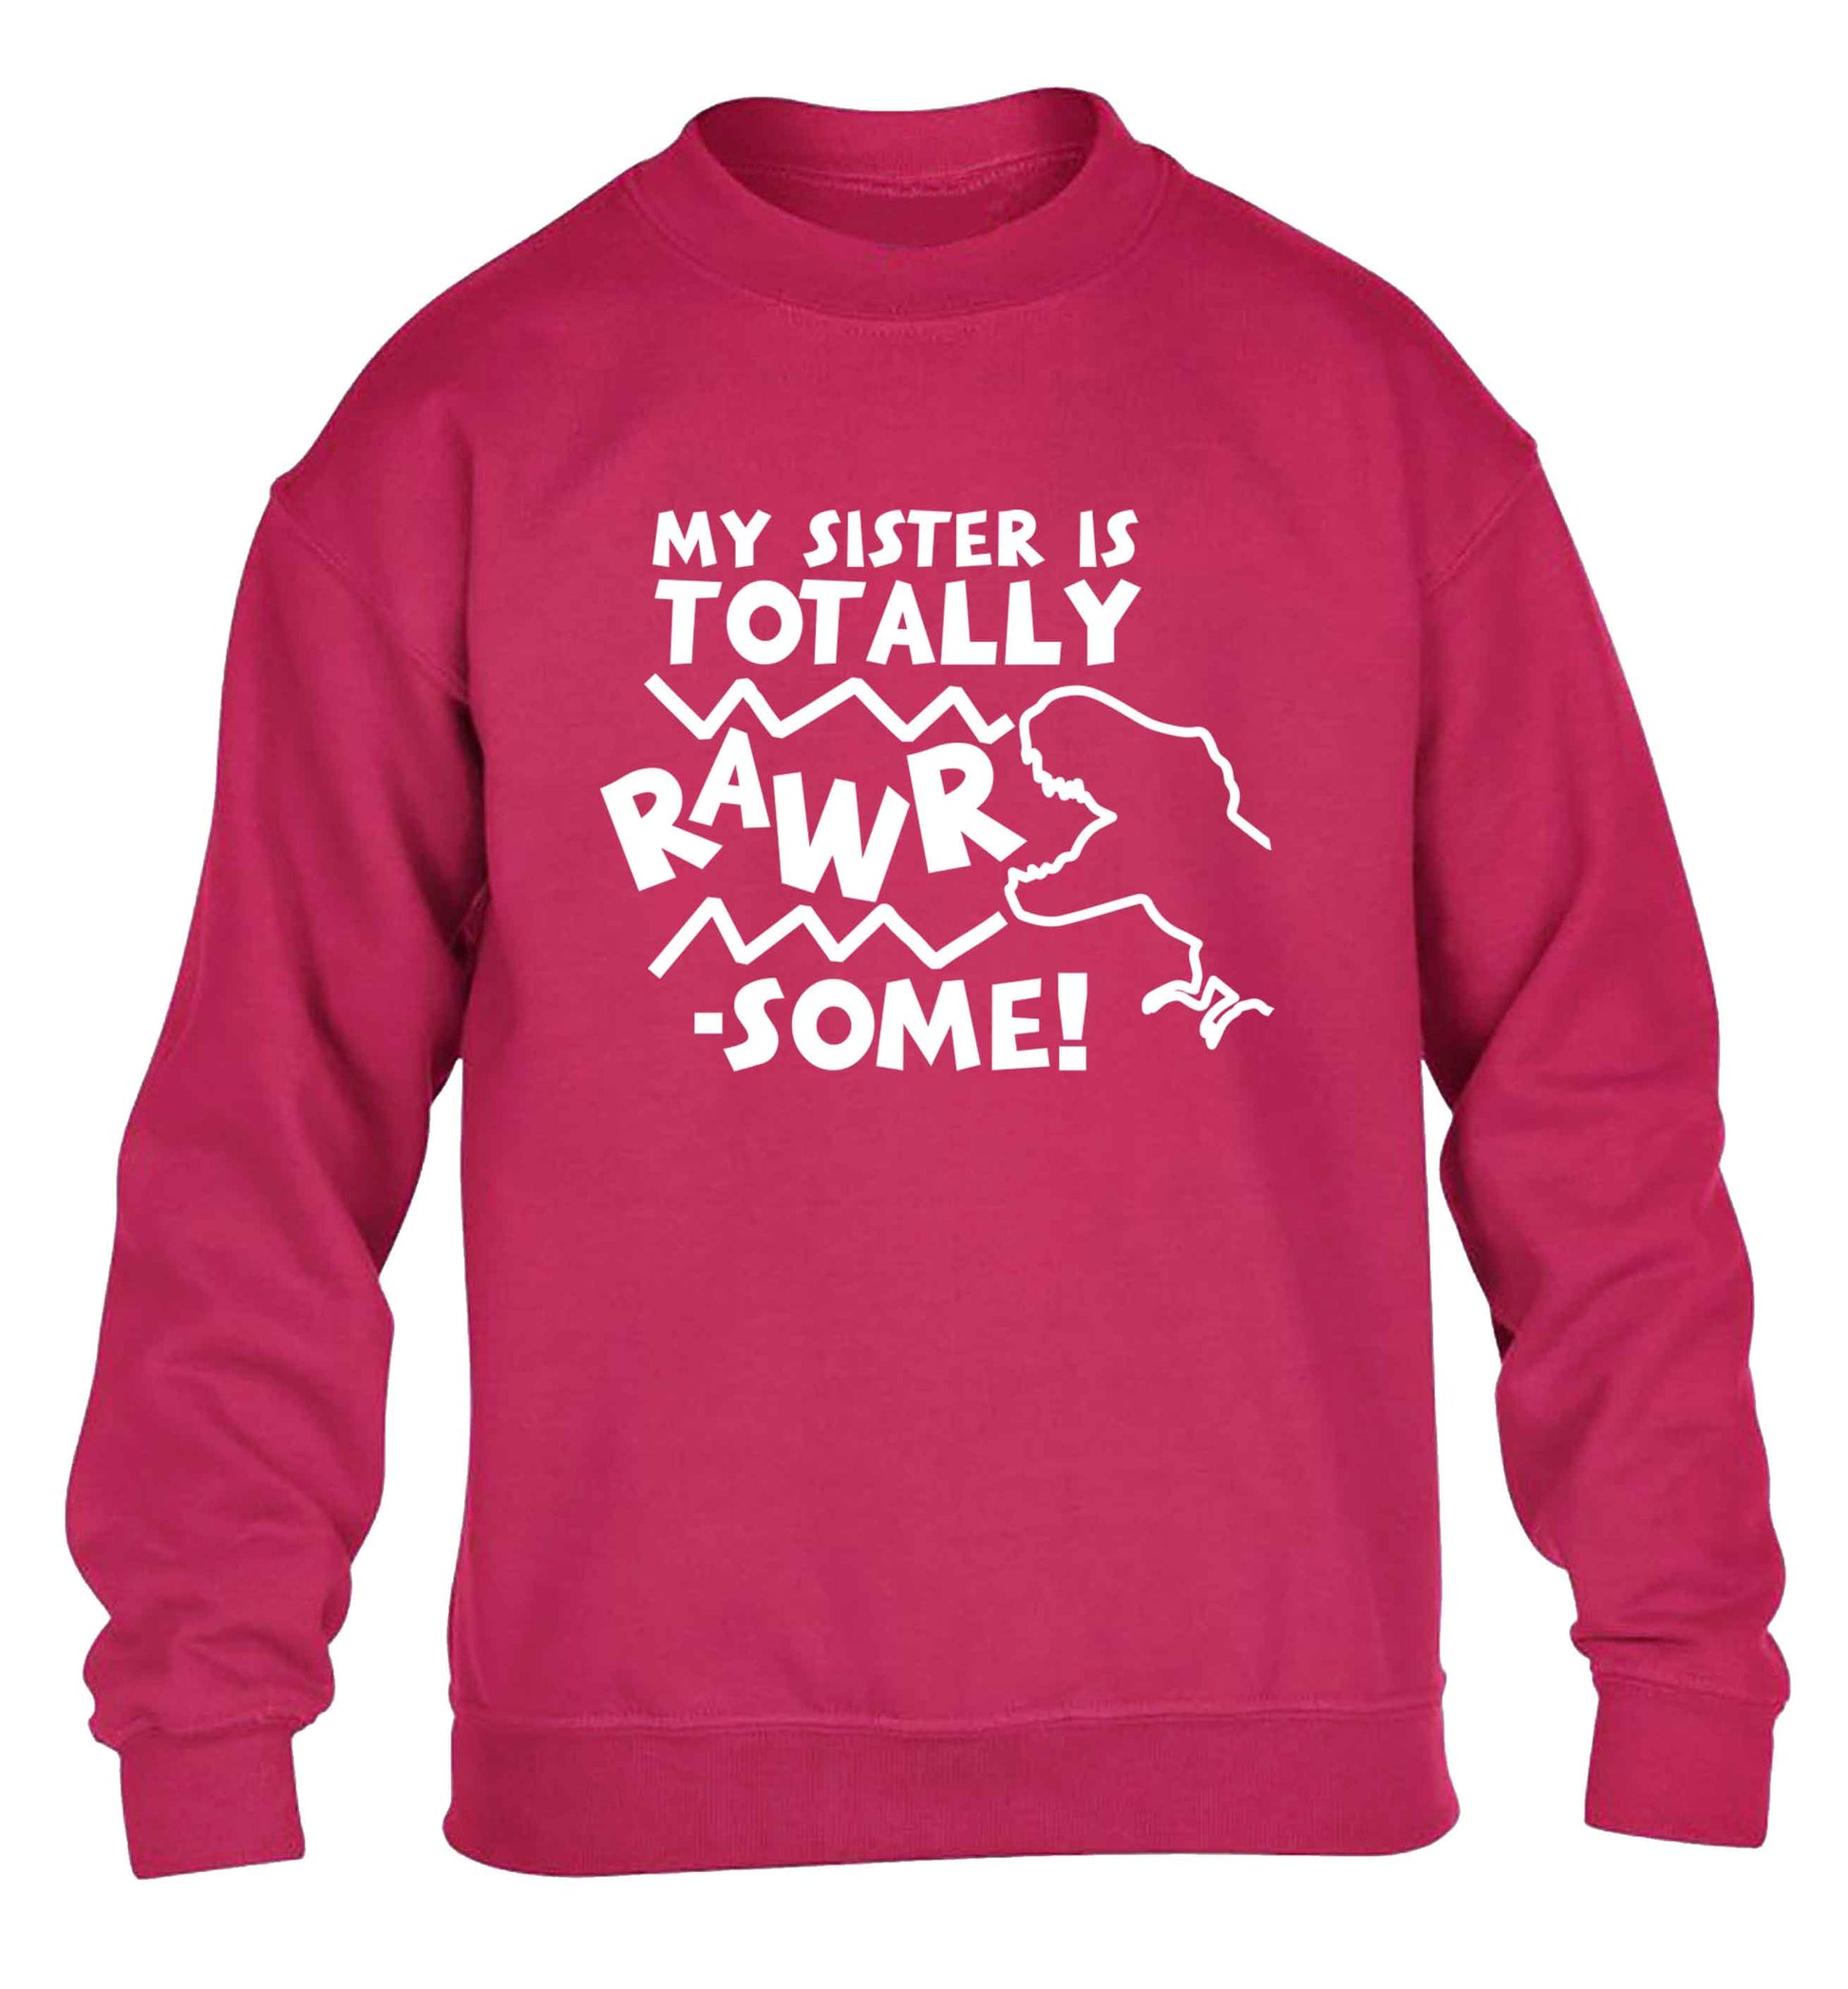 My sister is totally rawrsome children's pink sweater 12-13 Years